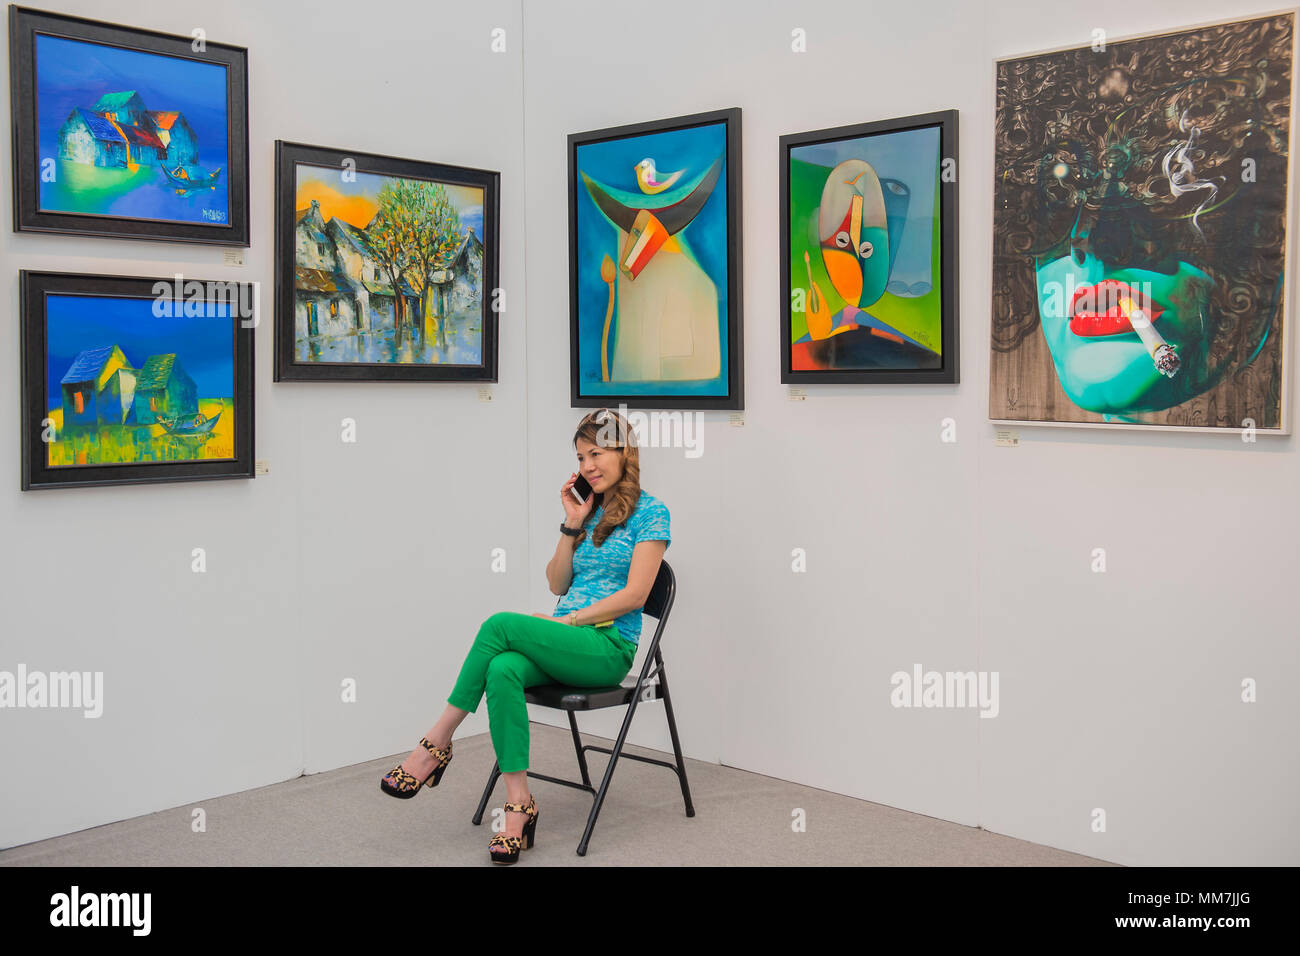 Hampstead, London, UK. 9th May, 2018. Angie with works on her Hanoi Art House stand - The Affordable Art Fair opens in Hampstead and runs until 14 May. The fair offers visitors a chance to purchase work from over 110 galleries at prices between £100 and £6,000 Credit: Guy Bell/Alamy Live News Stock Photo